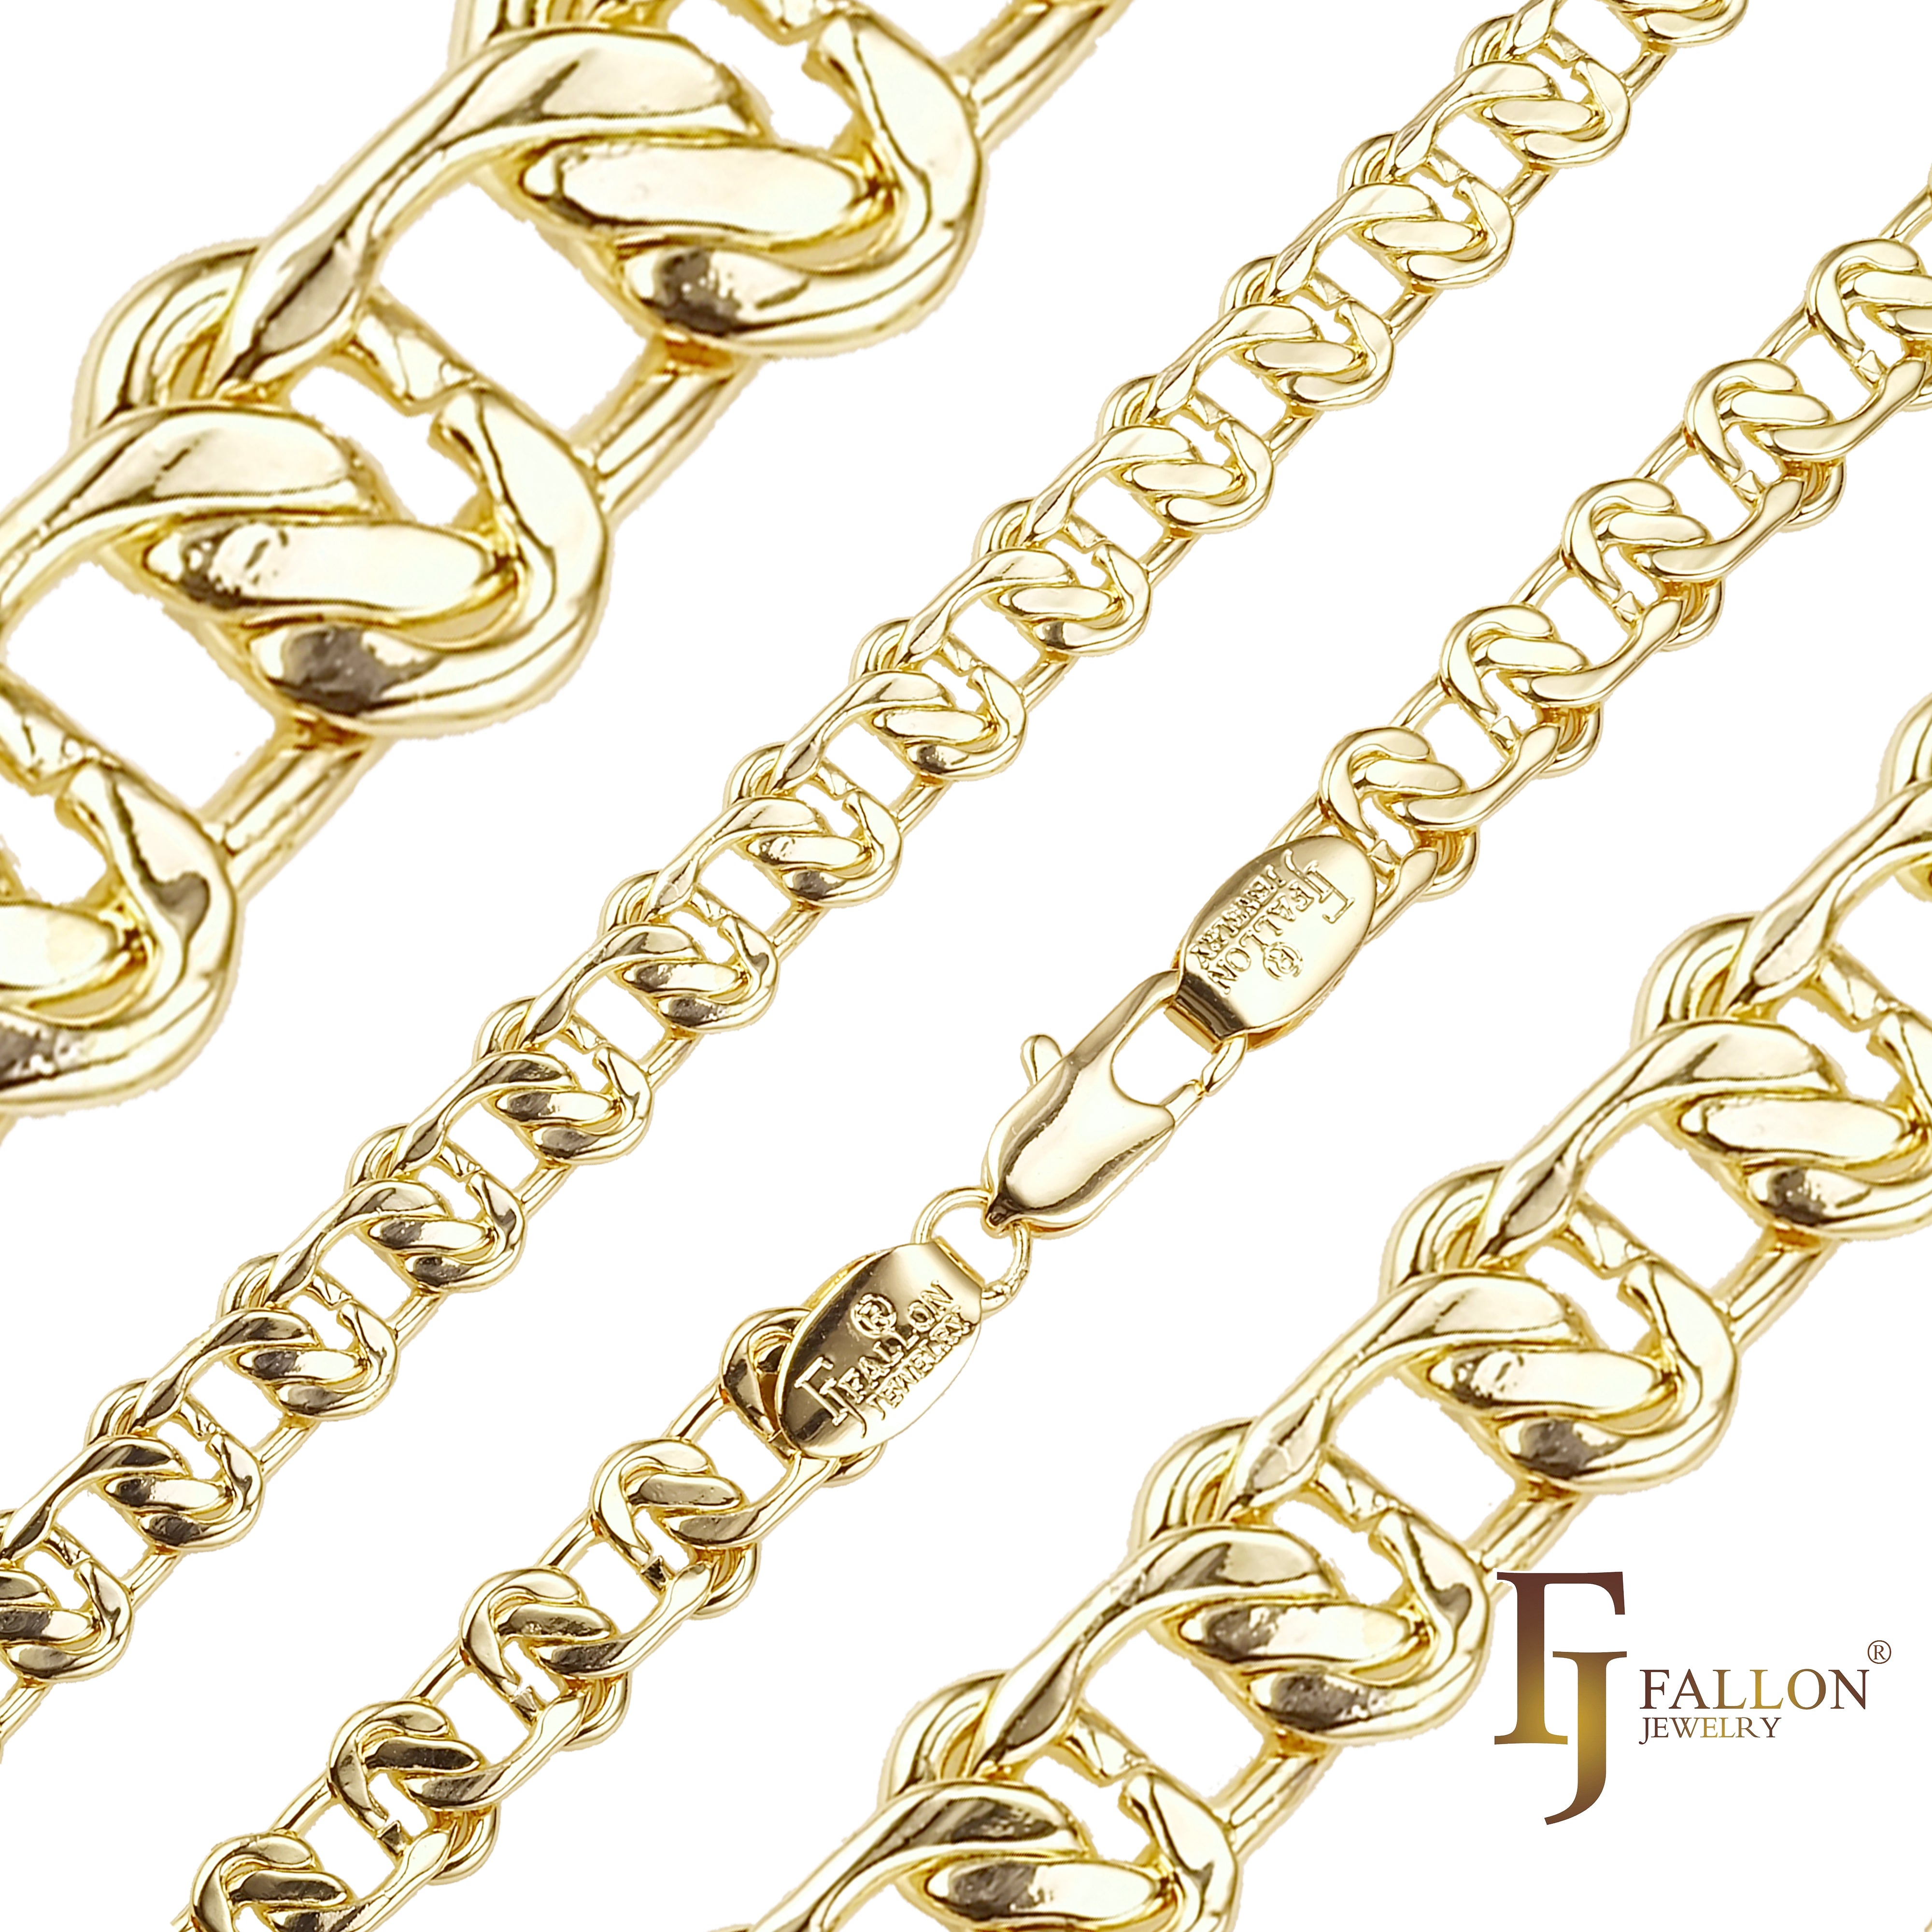 .Cable Snail link chains plated in 14K Gold, Rose Gold, White Gold